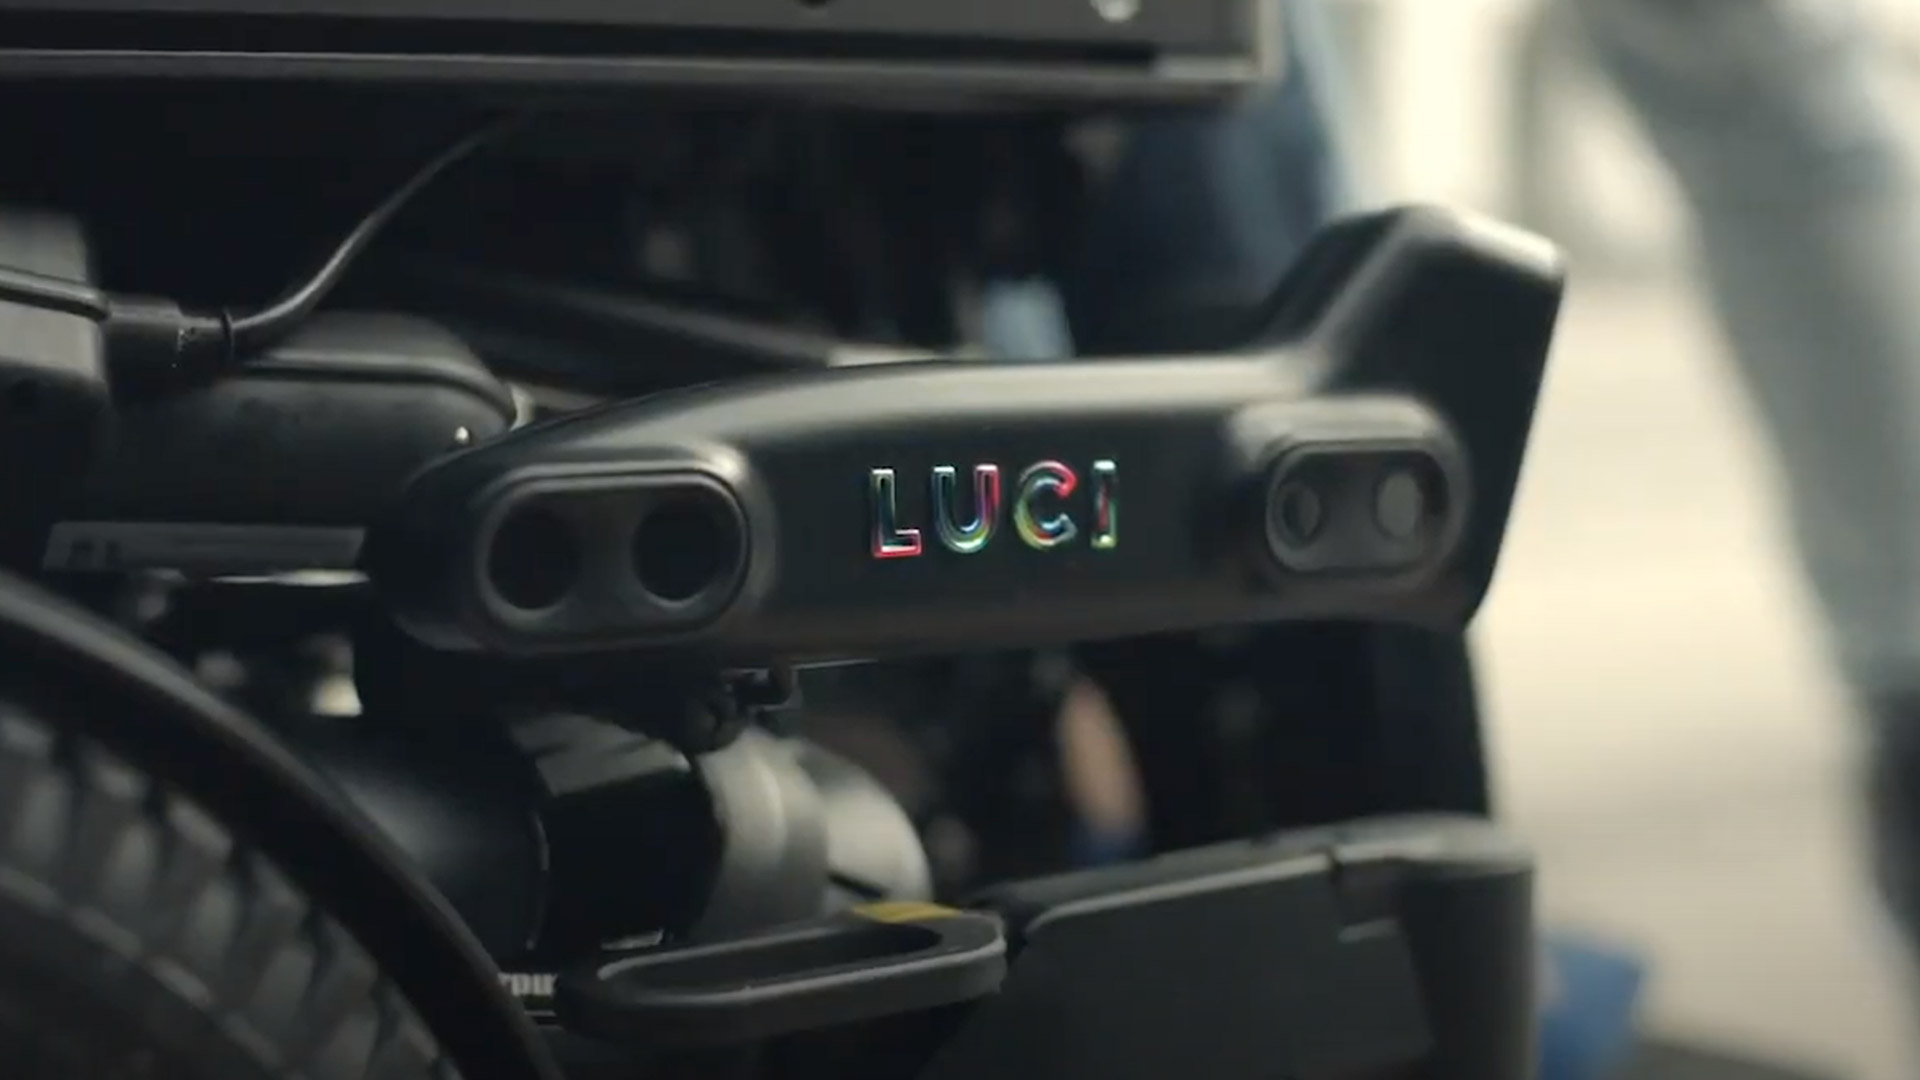 Smart mobility tech LUCI launches stateside to help powered wheelchairs “see” environments